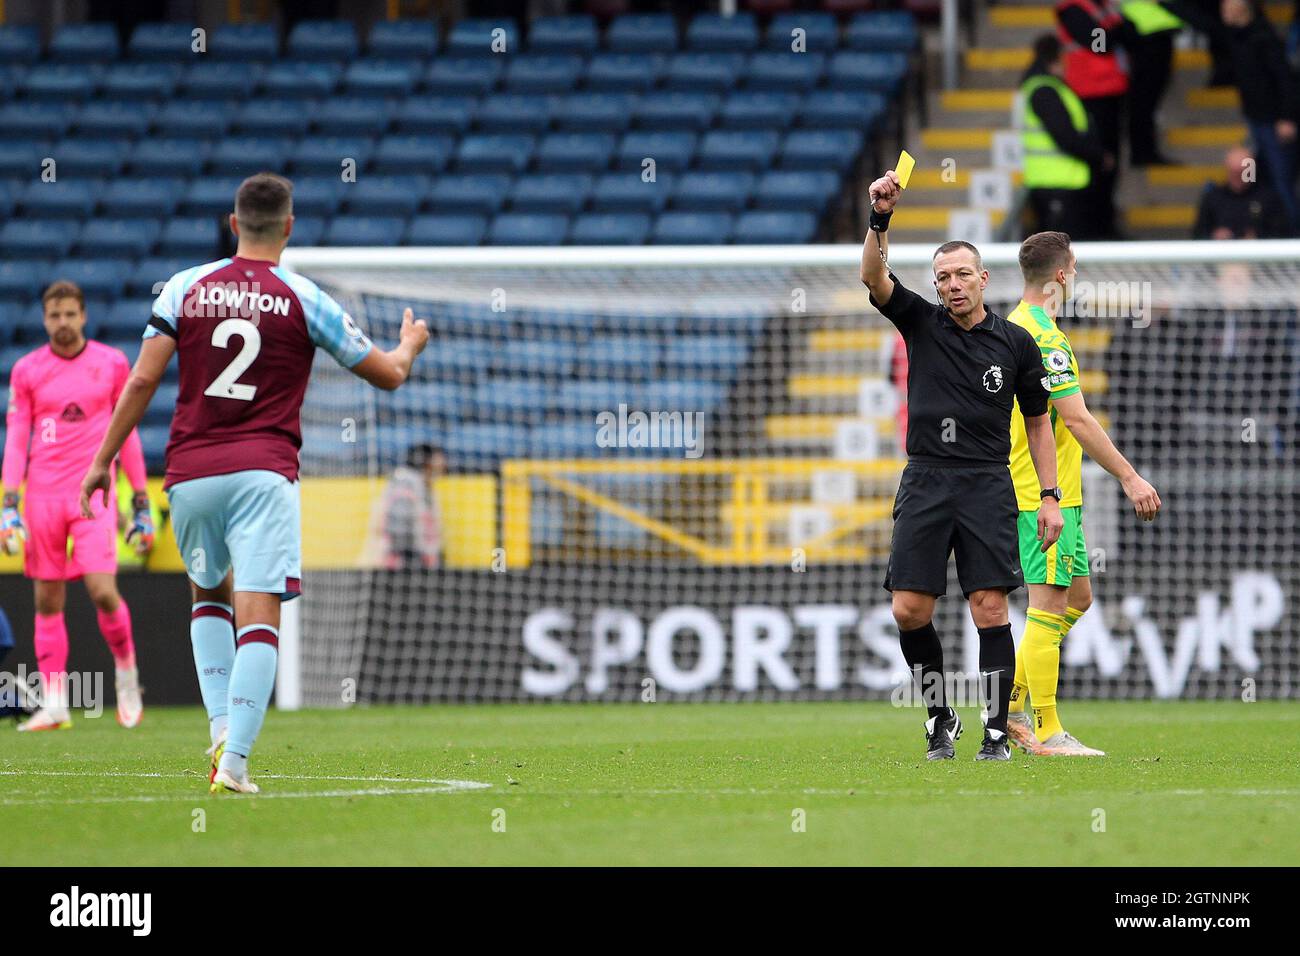 Burnley, UK. 02nd Oct, 2021. Match Referee Kevin Friend shows Matthew Lowton of Burnley a yellow cardduring the Premier League match between Burnley and Norwich City at Turf Moor on October 2nd 2021 in Burnley, England. (Photo by Mick Kearns/phcimages.com) Credit: PHC Images/Alamy Live News Stock Photo